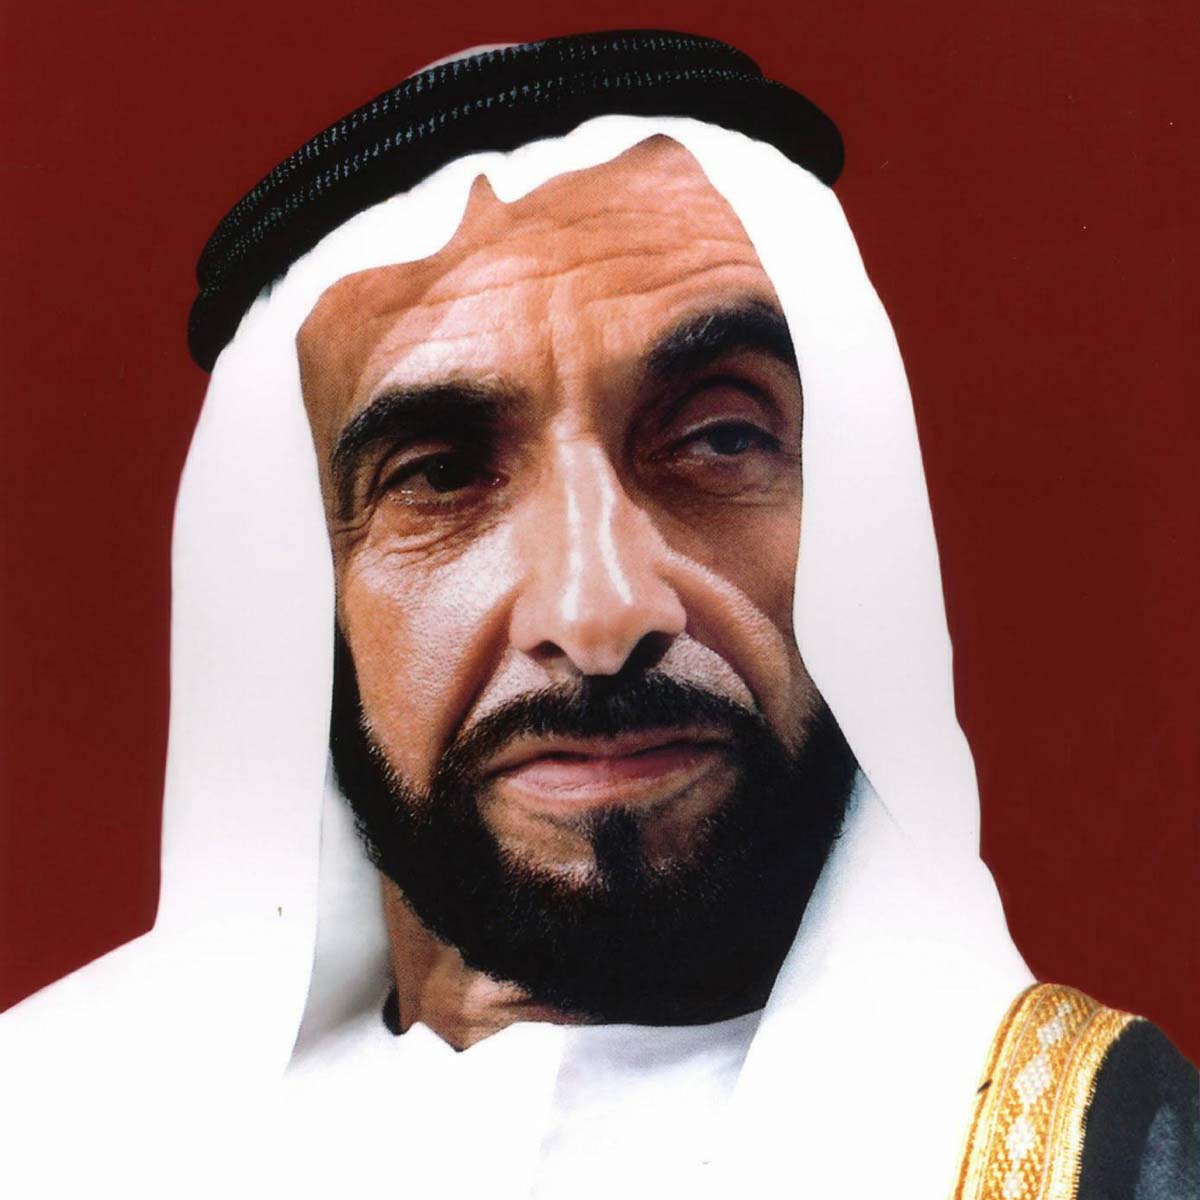 Sheikh Zayed, an exceptional leader who marked the history of politics in the Arab world